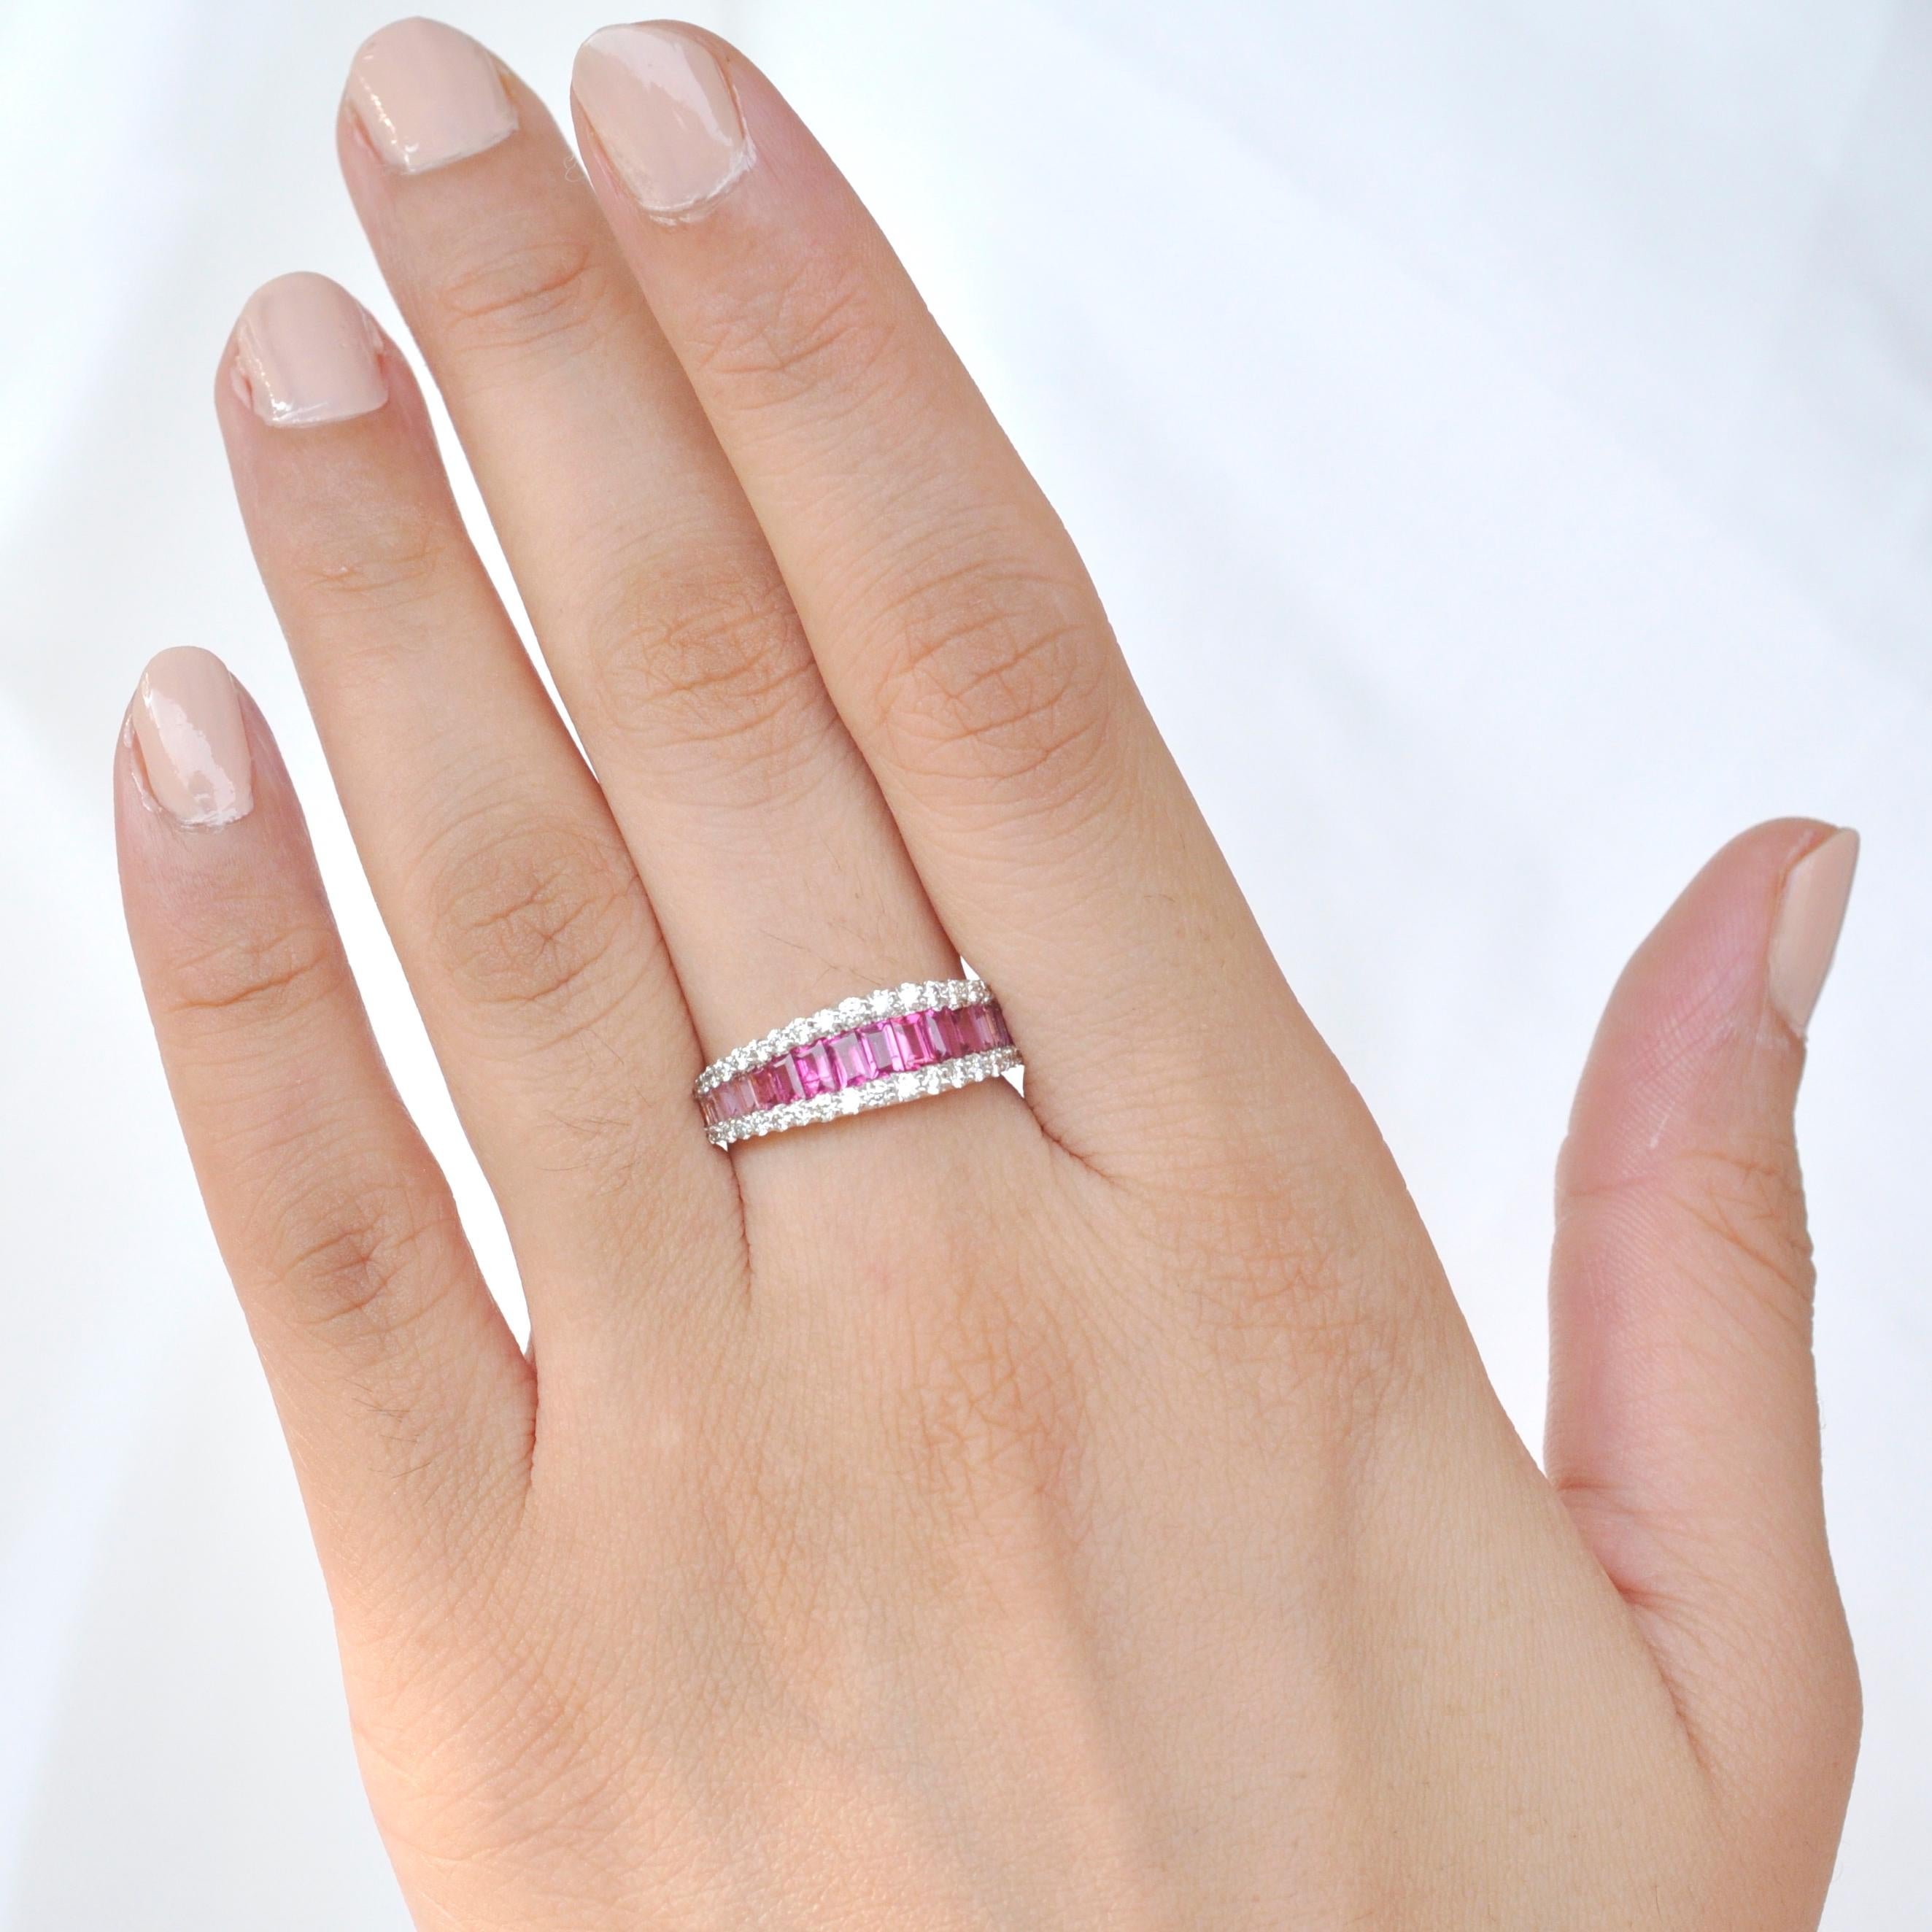 18 karat gold pink tourmaline baguette diamond contemporary wedding band ring.

Art, color and culture all come together to inspire this delicate 18 karat gold pink tourmaline baguette diamond contemporary wedding band ring, where dégradé hues of